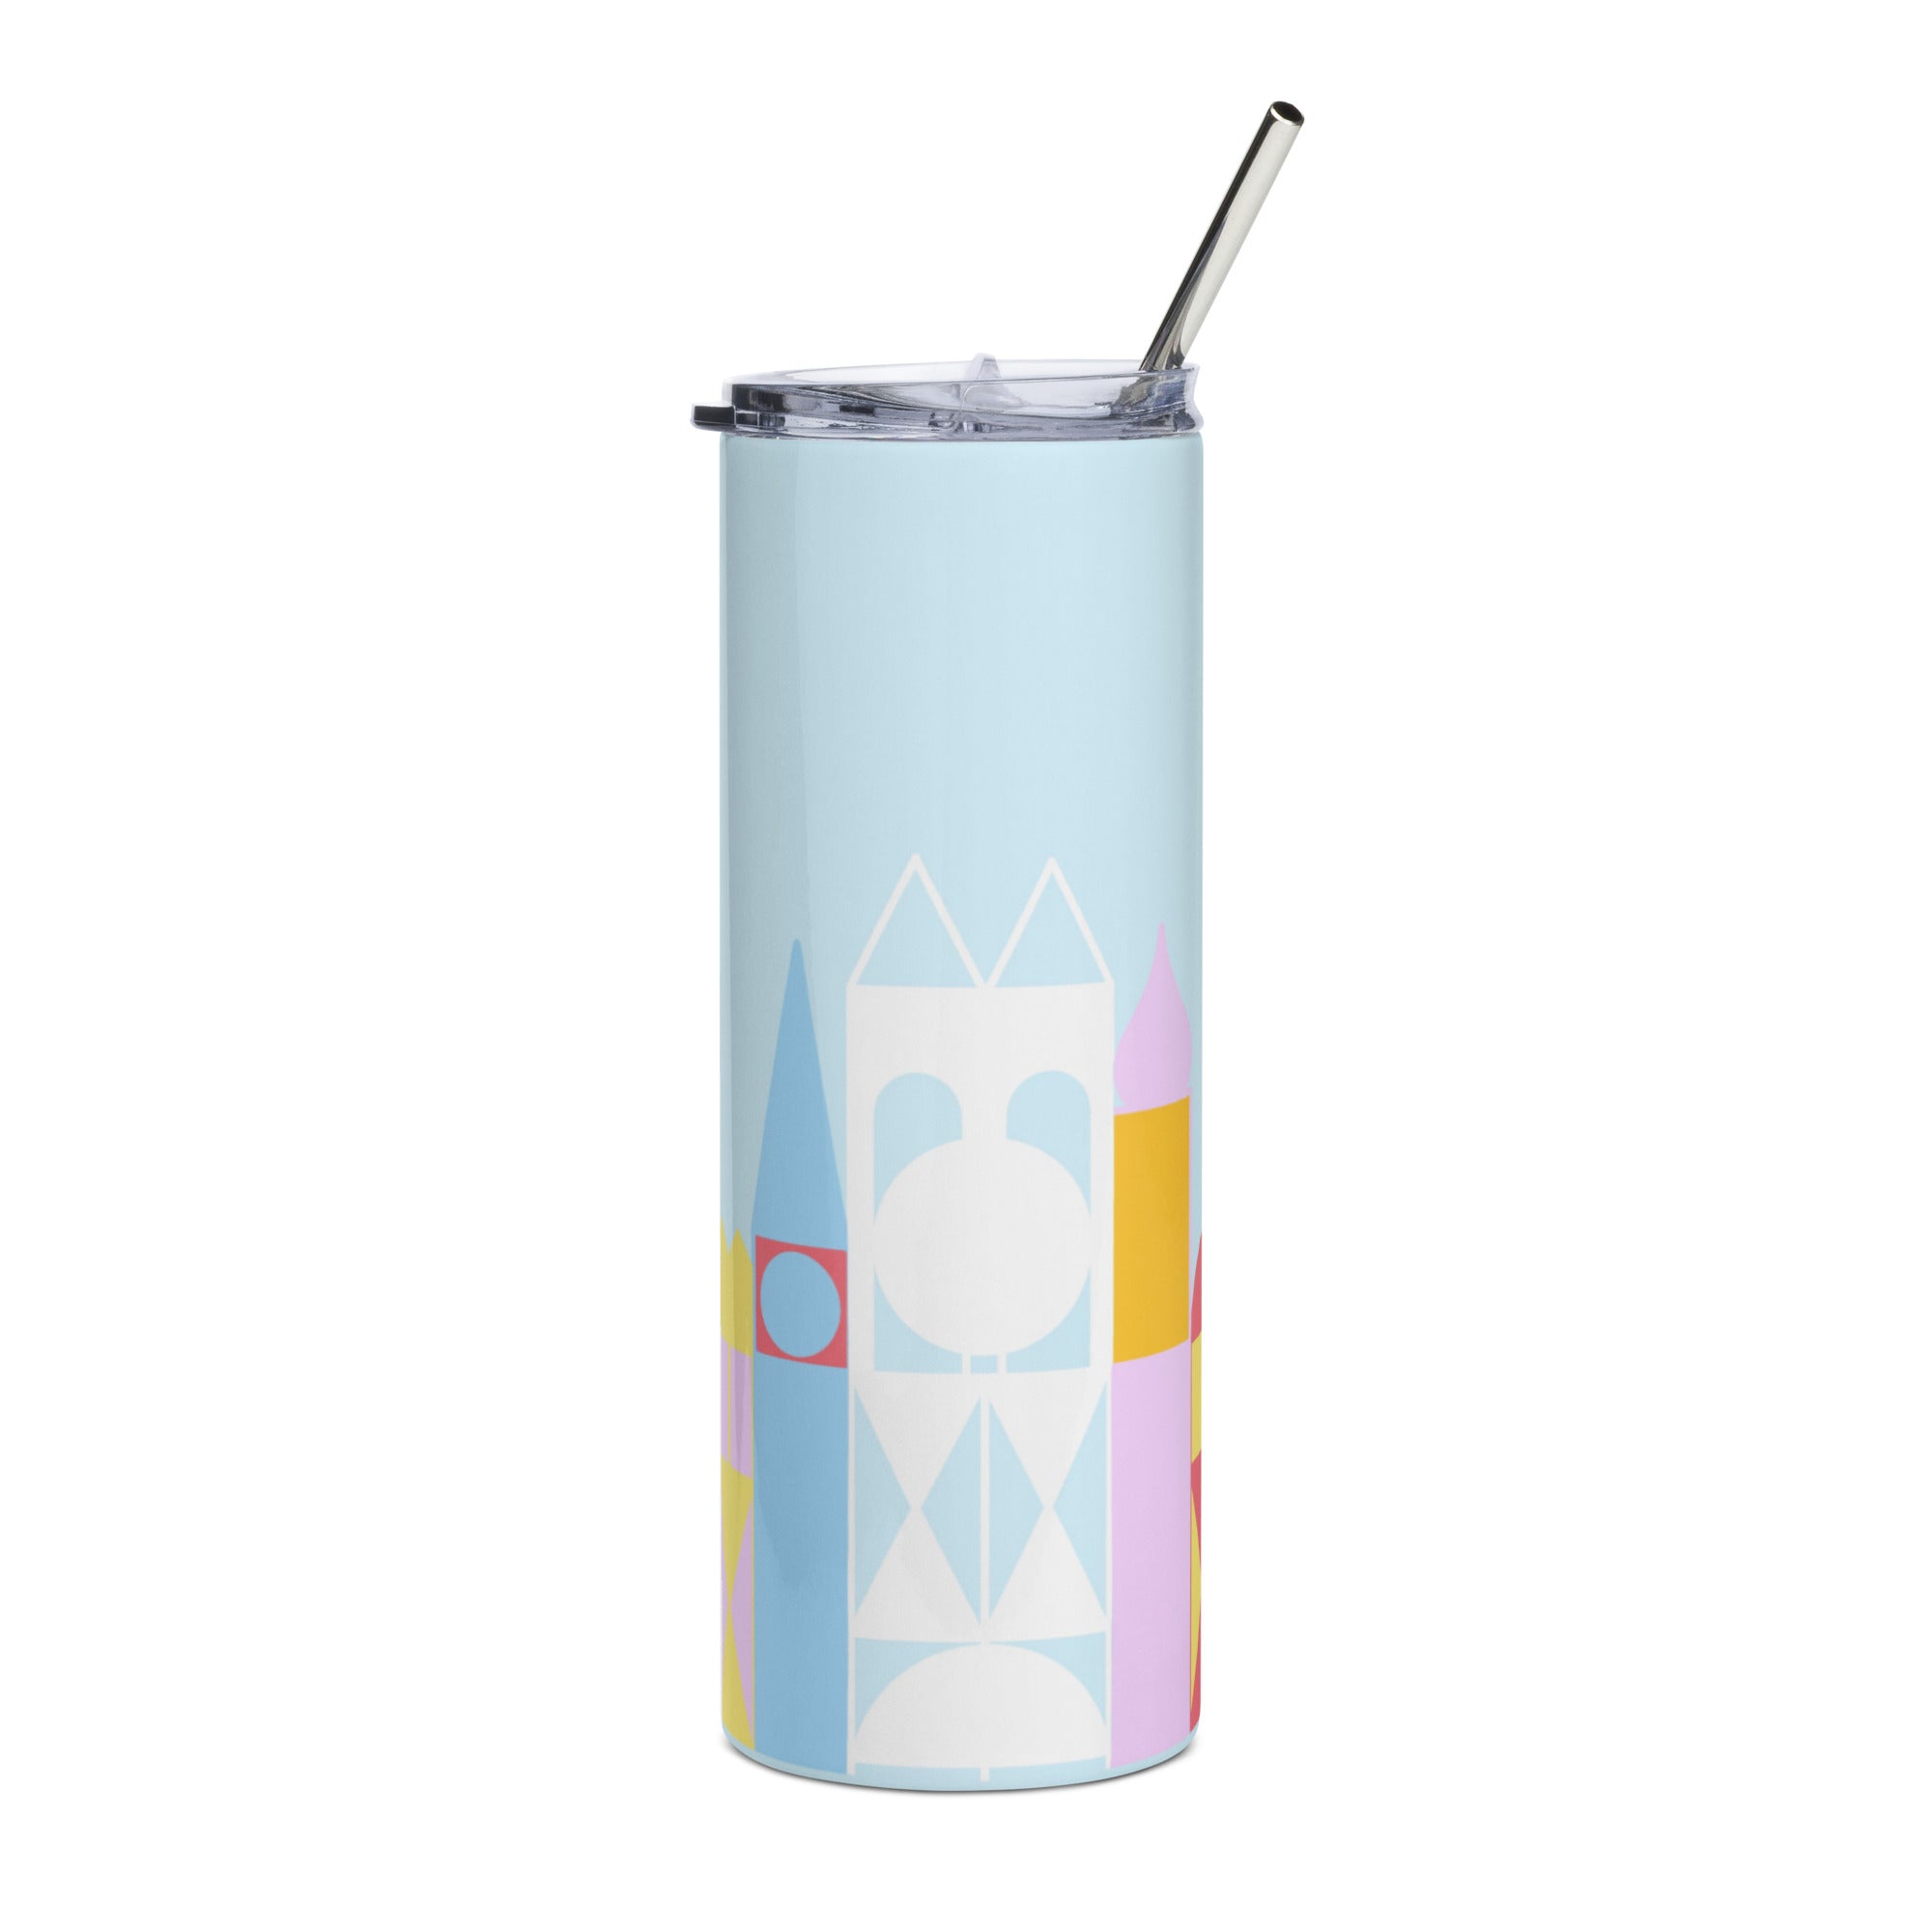 Small World Stainless steel tumbler